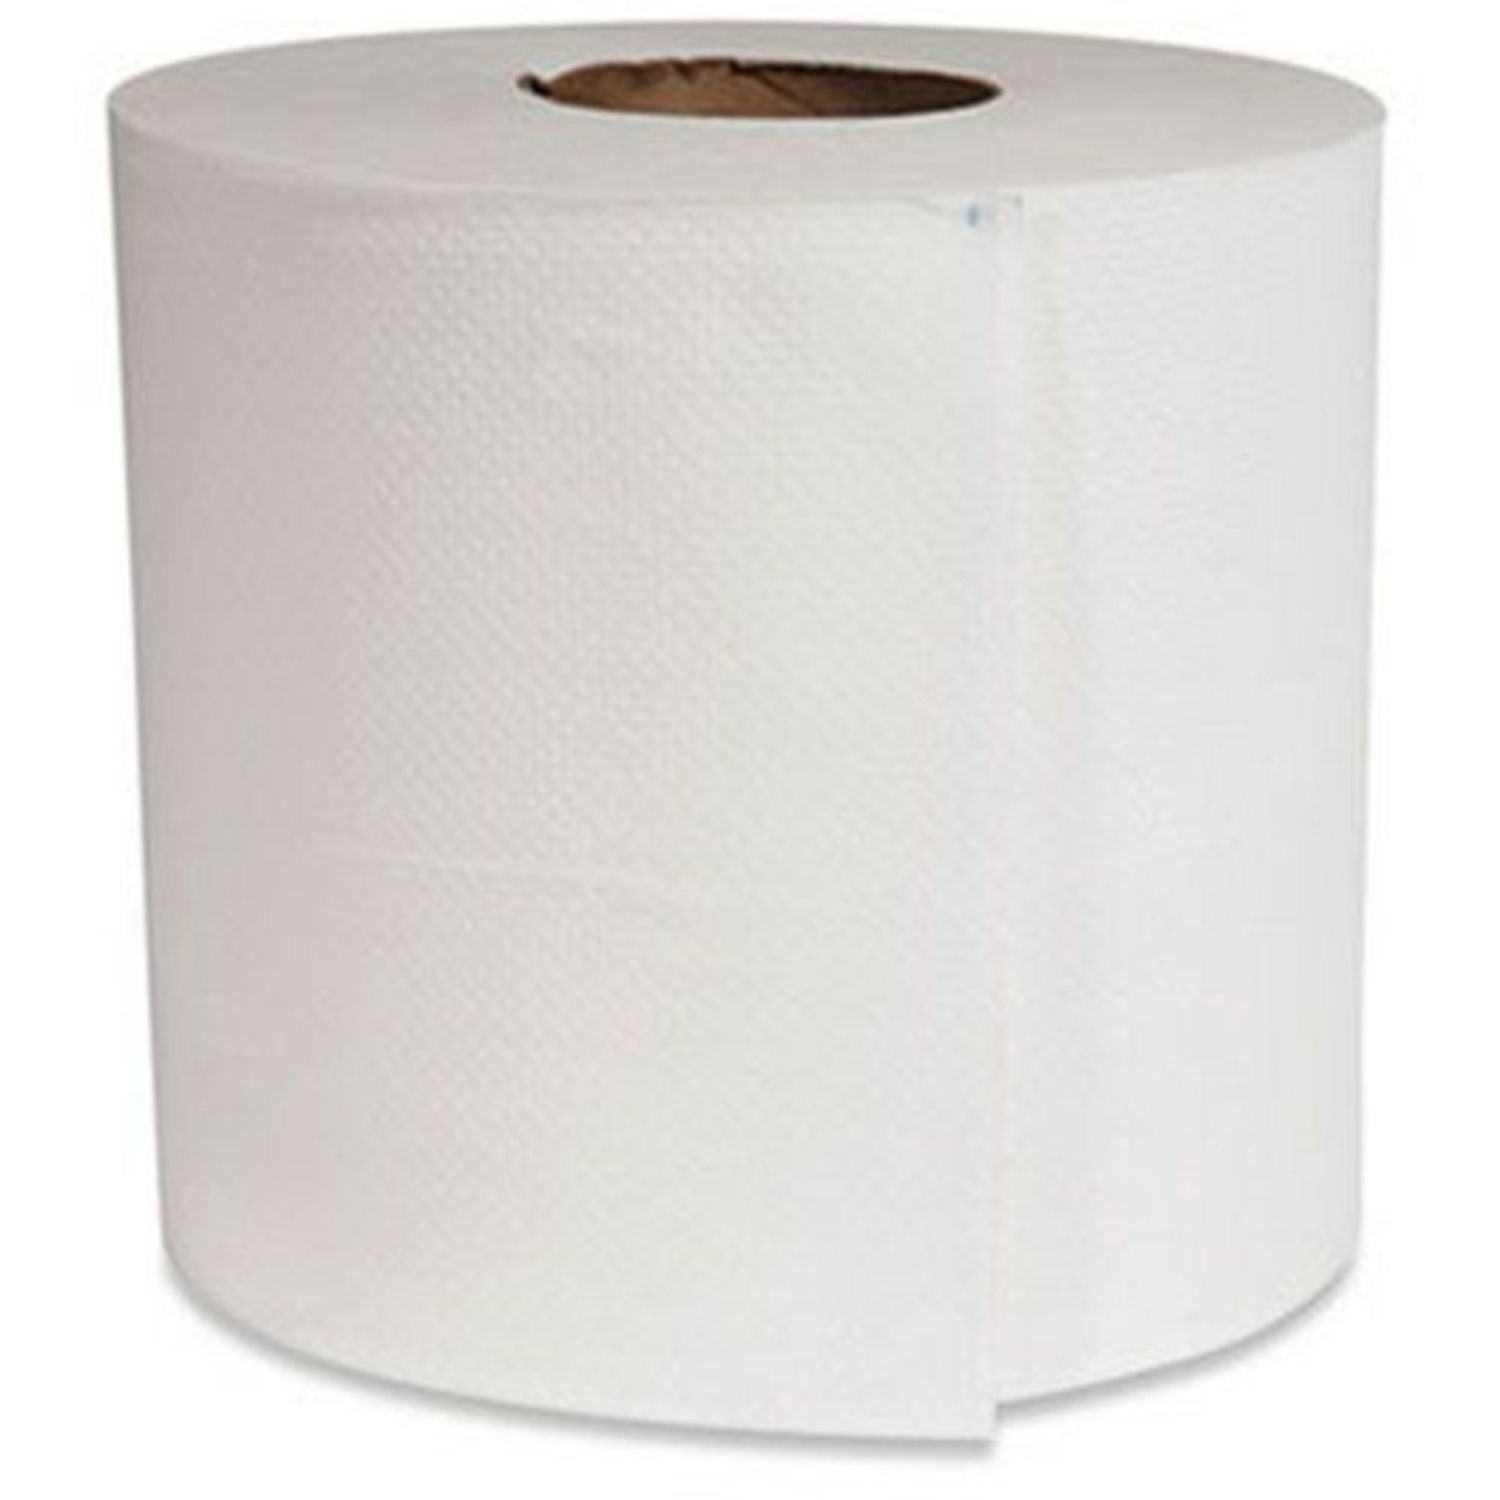 Center Pull Towels 2 Ply, 600 Sheets/Roll, White, Center Pull, 6 / Case